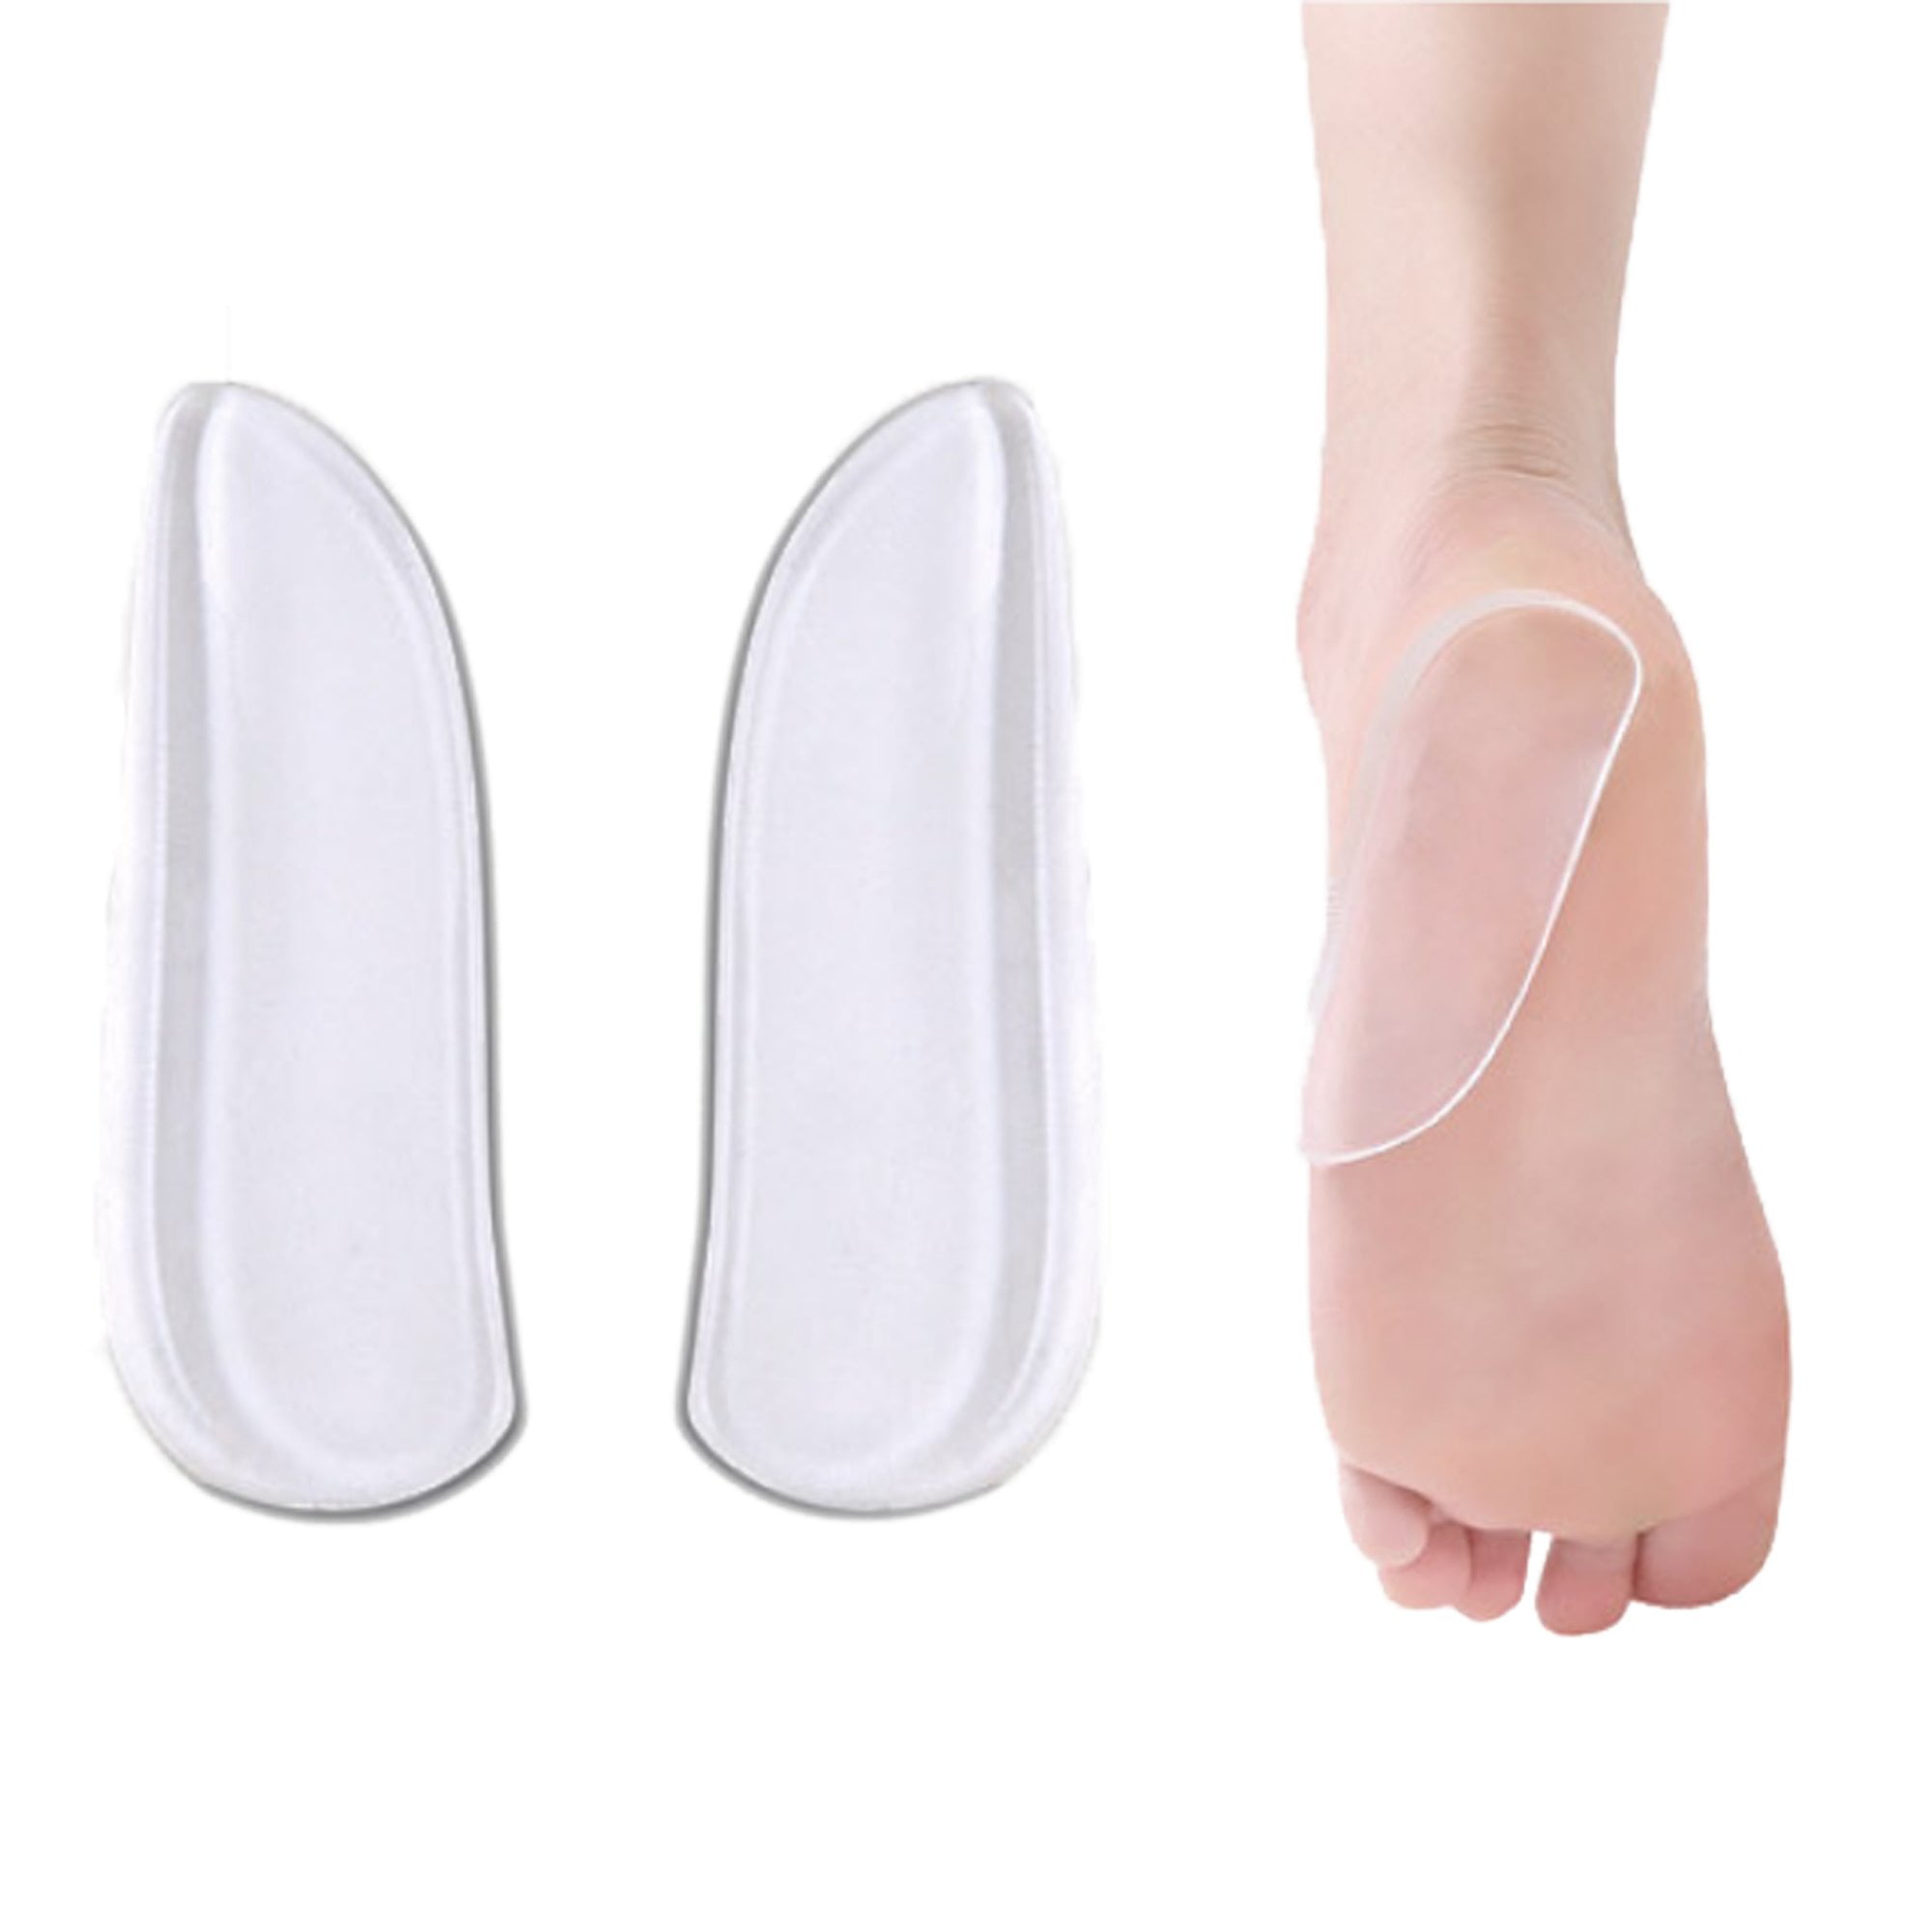 Mars Wellness Medial & Lateral Heel Wedge Silicone 2 Pairs Universal